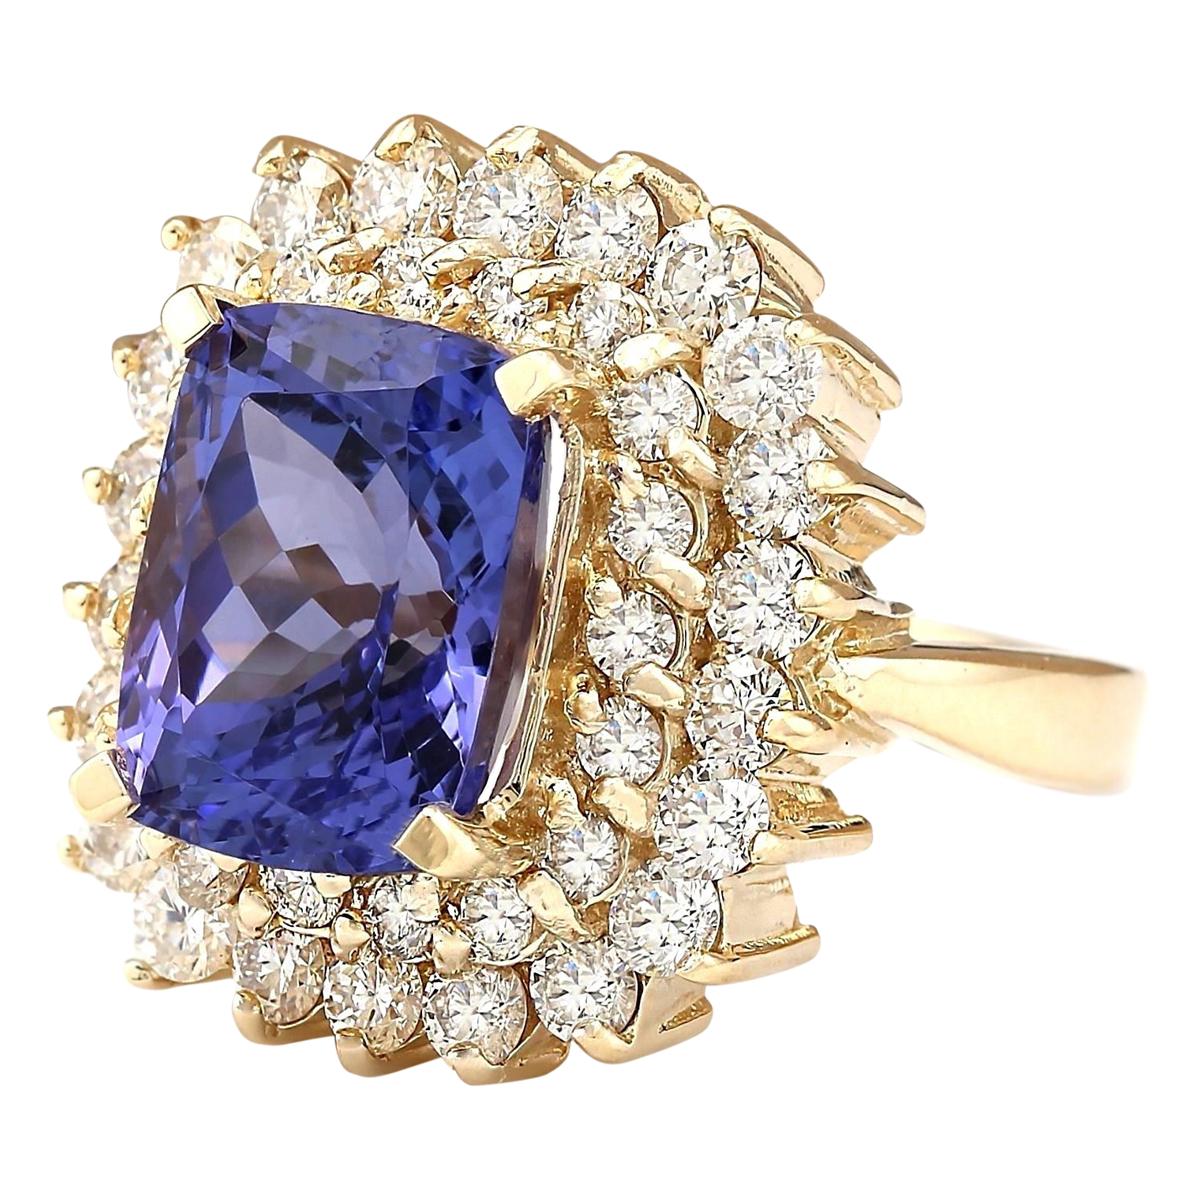 Step into a world of unparalleled elegance with our mesmerizing 9.30 Carat Tanzanite Diamond Ring, meticulously crafted in luxurious 14 Karat Yellow Gold. From its distinguished 14K stamp affirming its authenticity to its substantial ring weight of